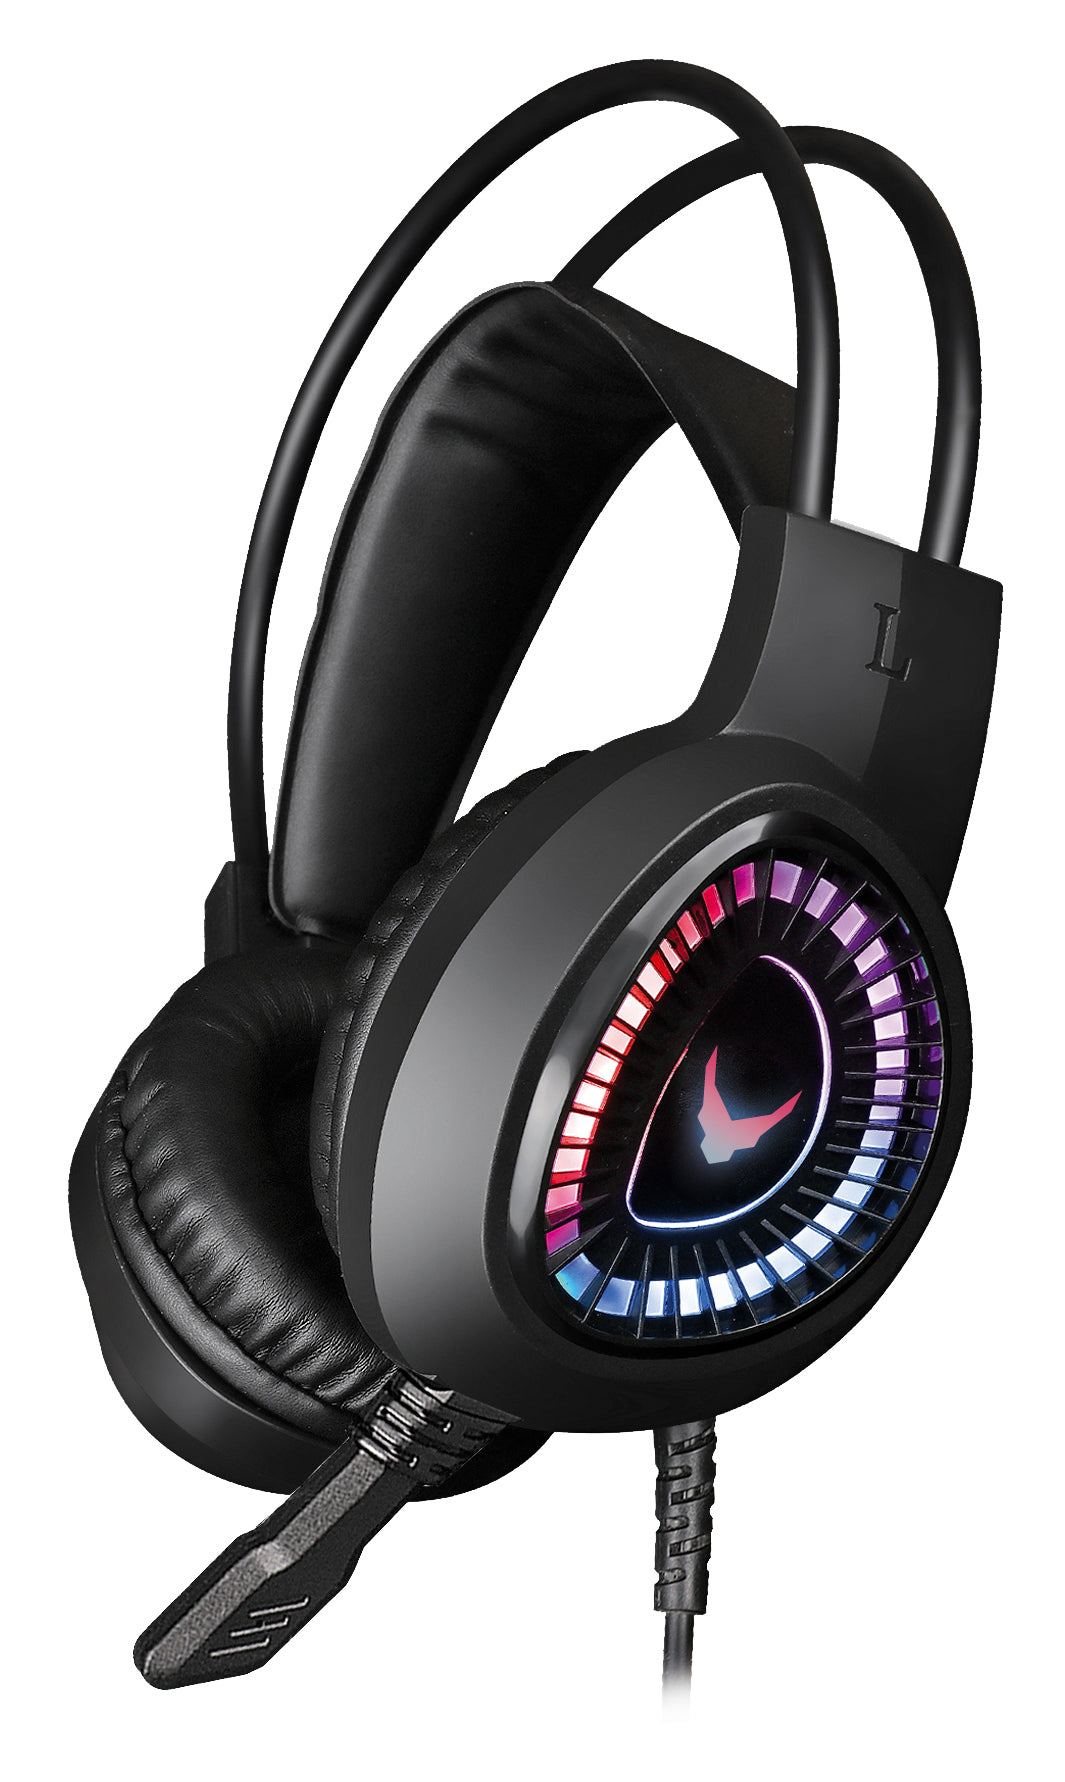 Pro Gaming Headset with RGB Backlight